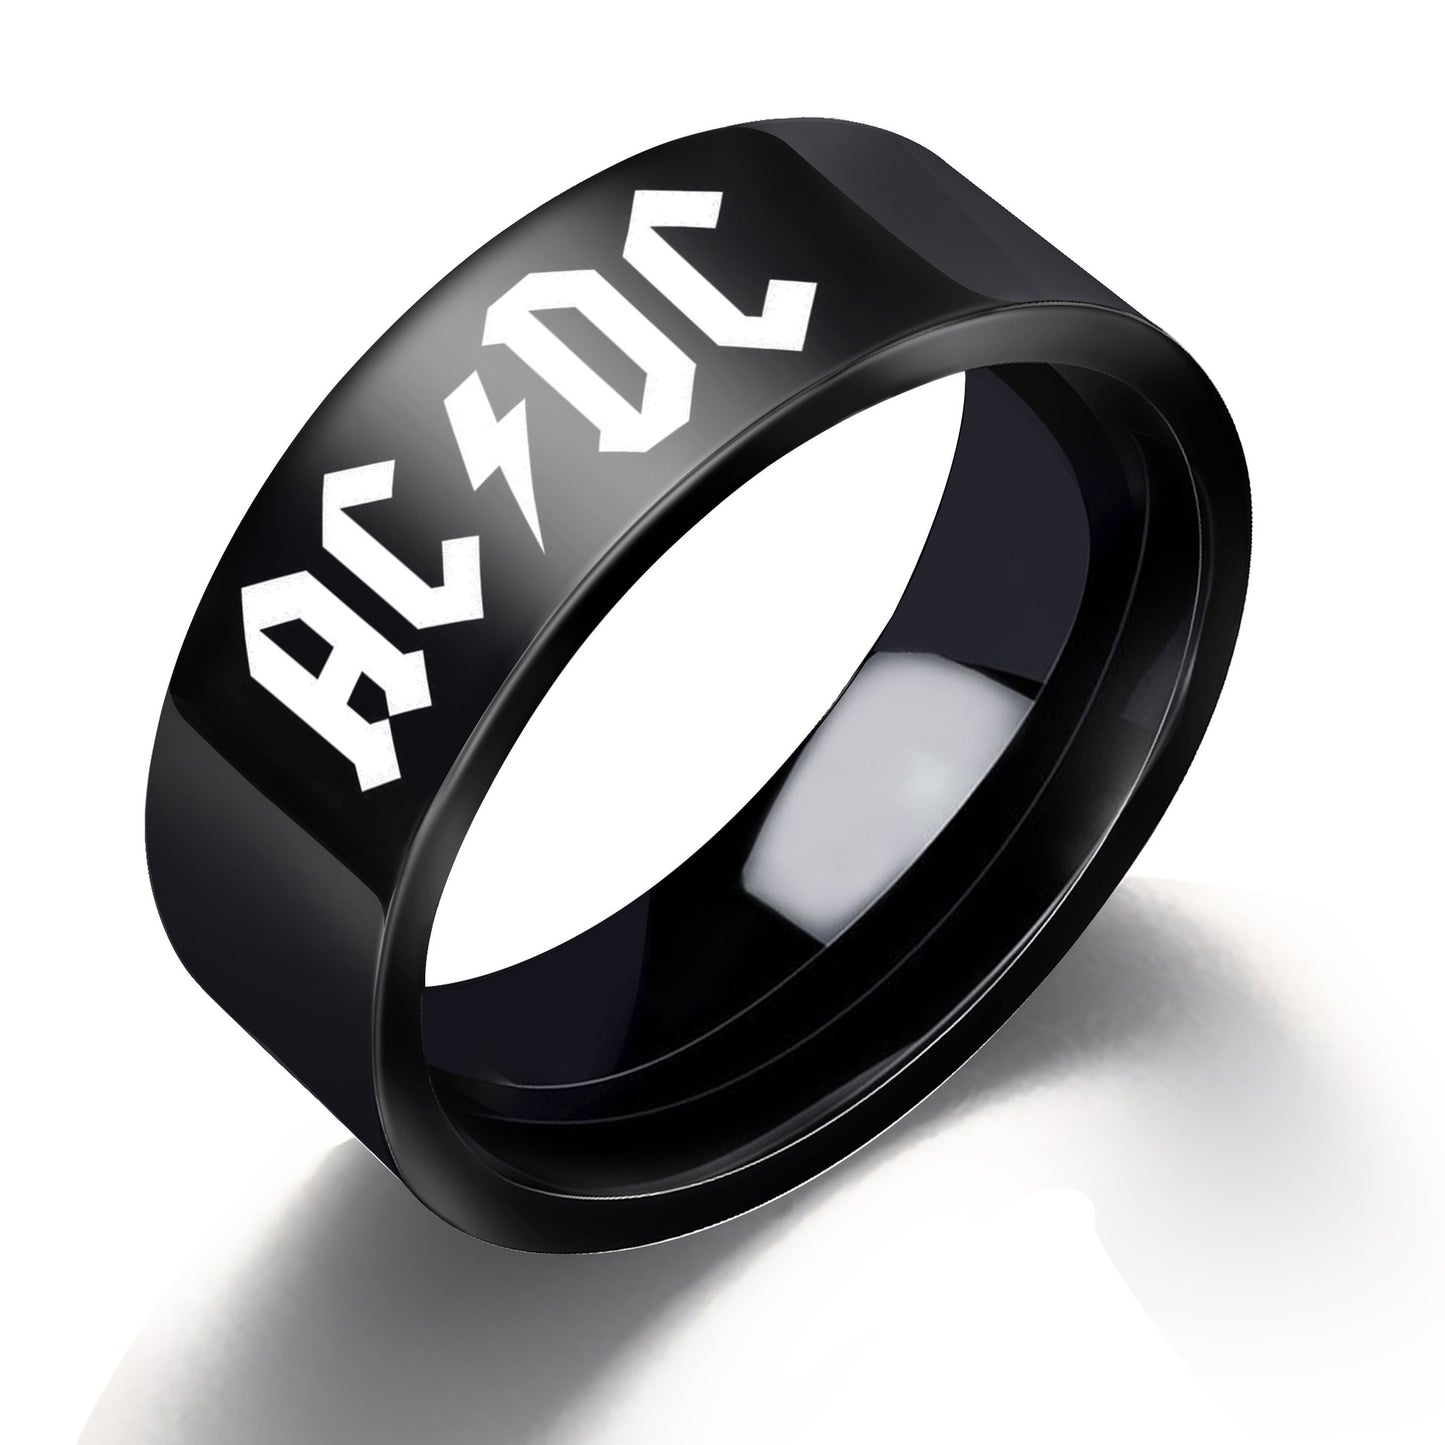 AC/DC Band Mens Ring - Stainless Steel Silver & Black - Unisex